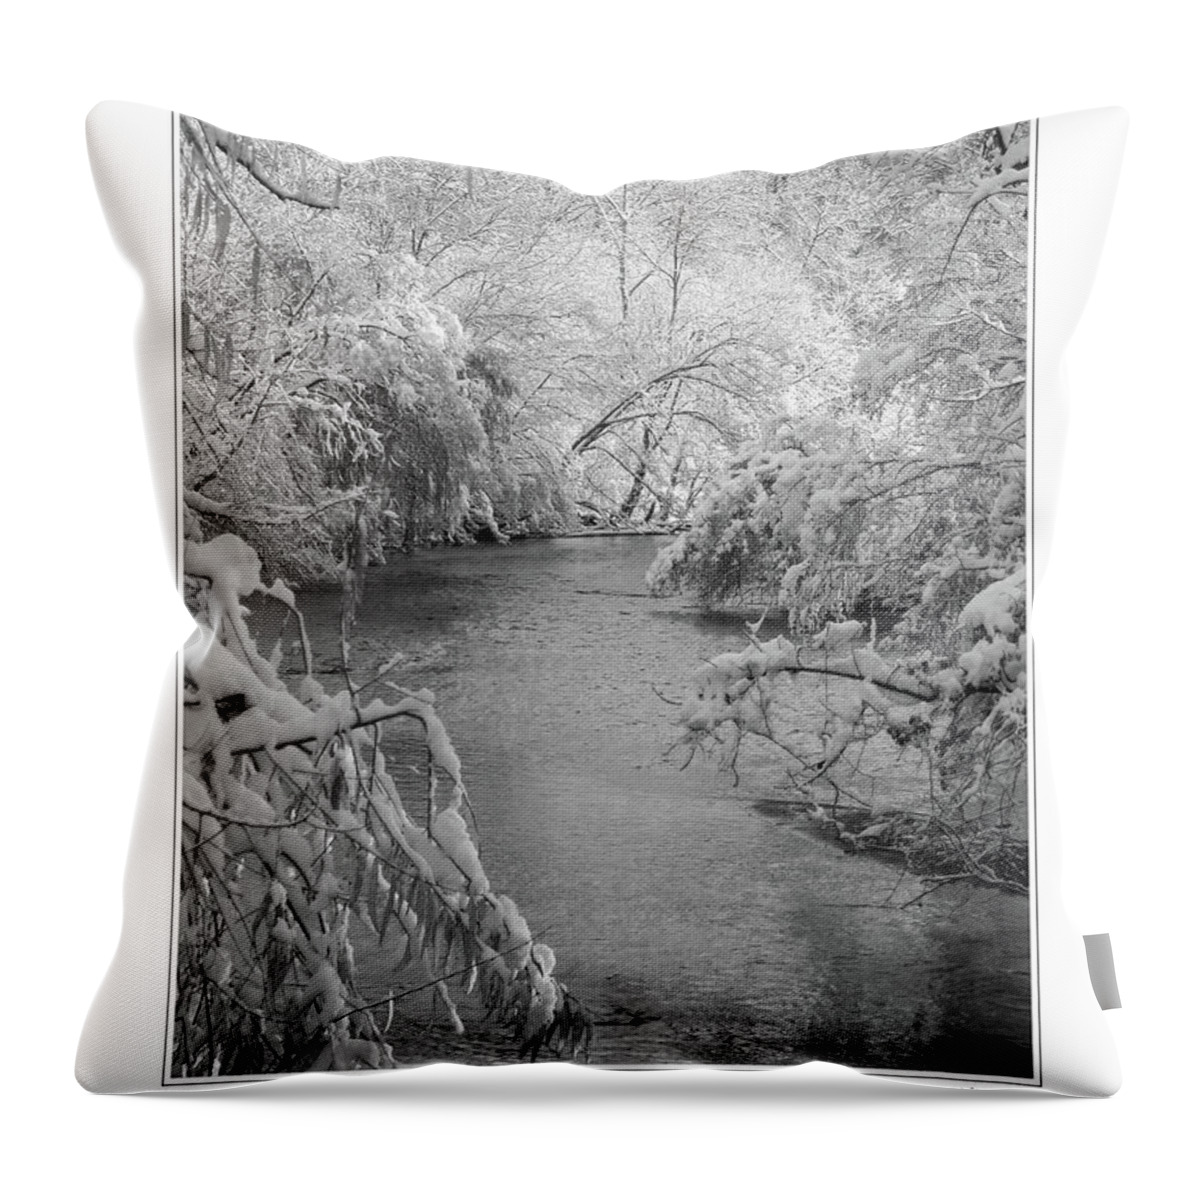 Black And White Throw Pillow featuring the photograph The Huron River by Phil Perkins